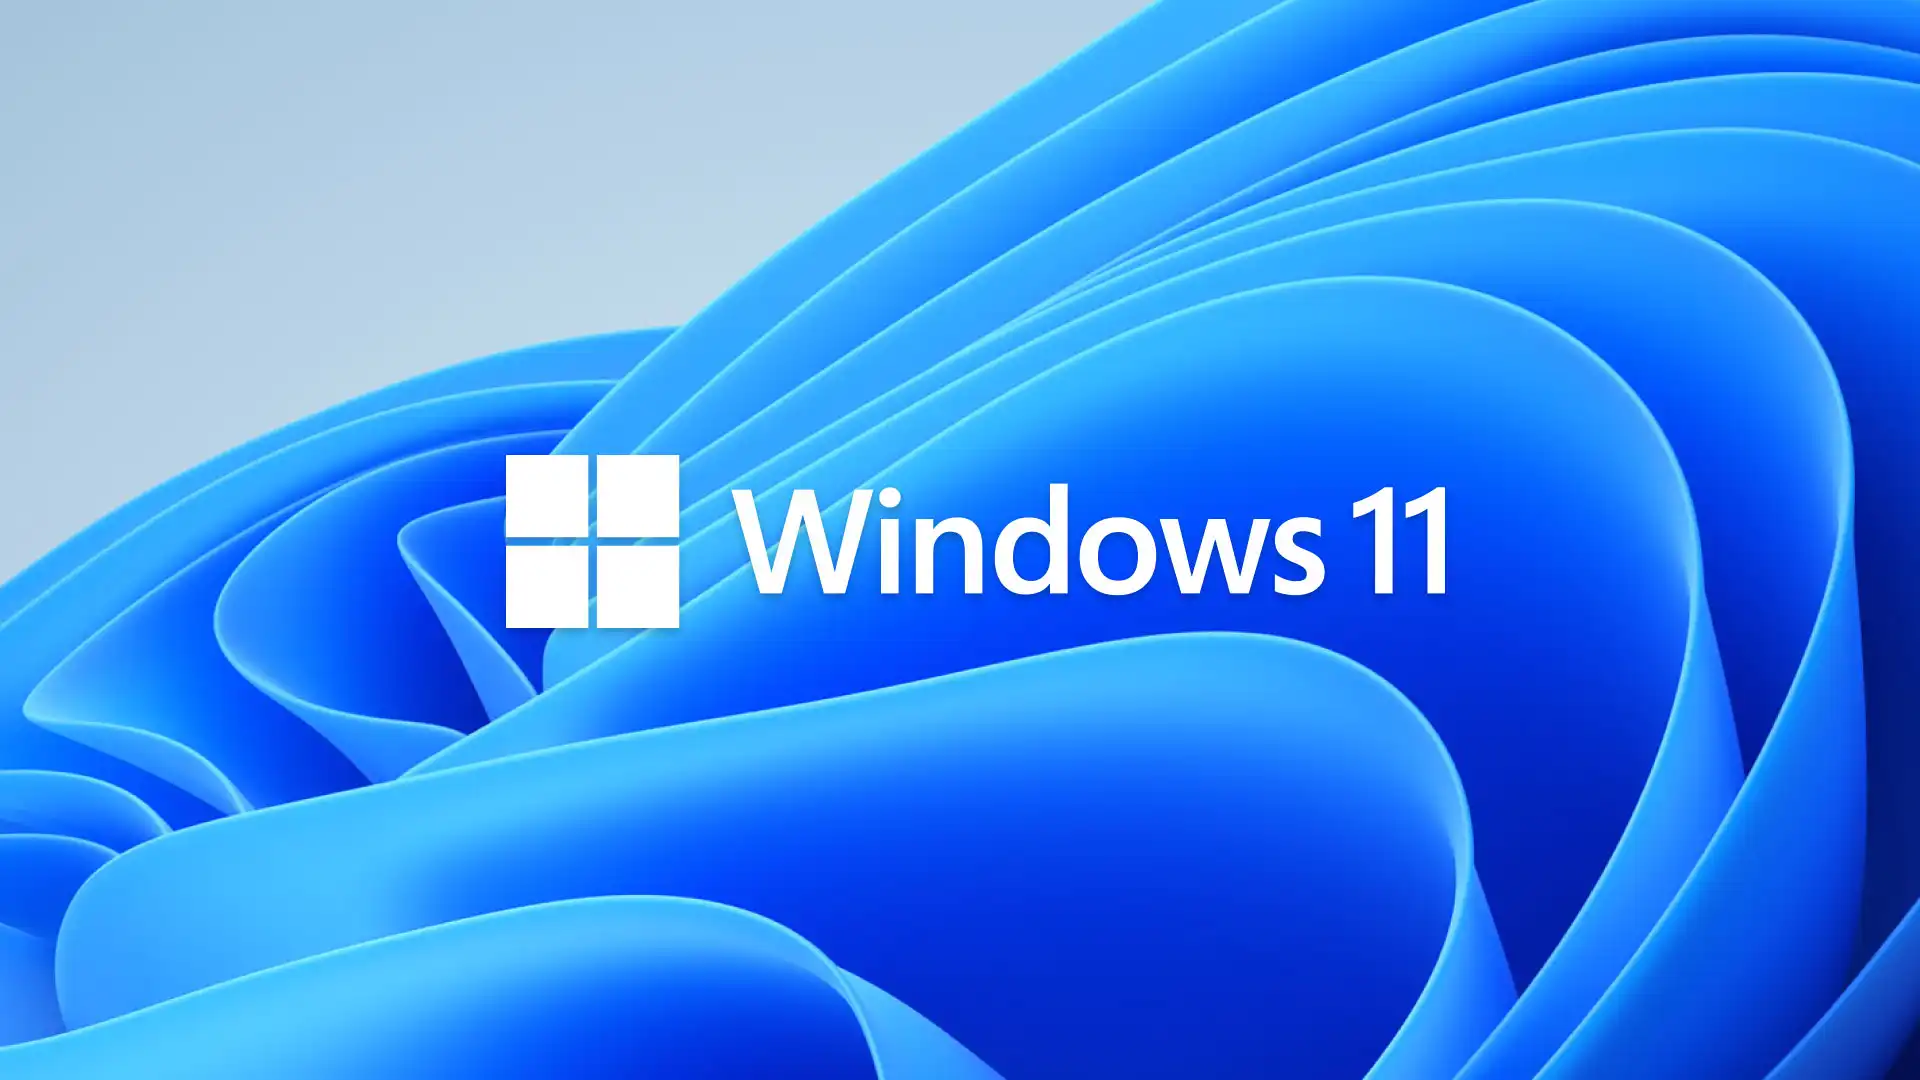 Windows 11's Latest Upgrade Why It's More Than Just a Missed Chance for a Windows 12 Revolution--